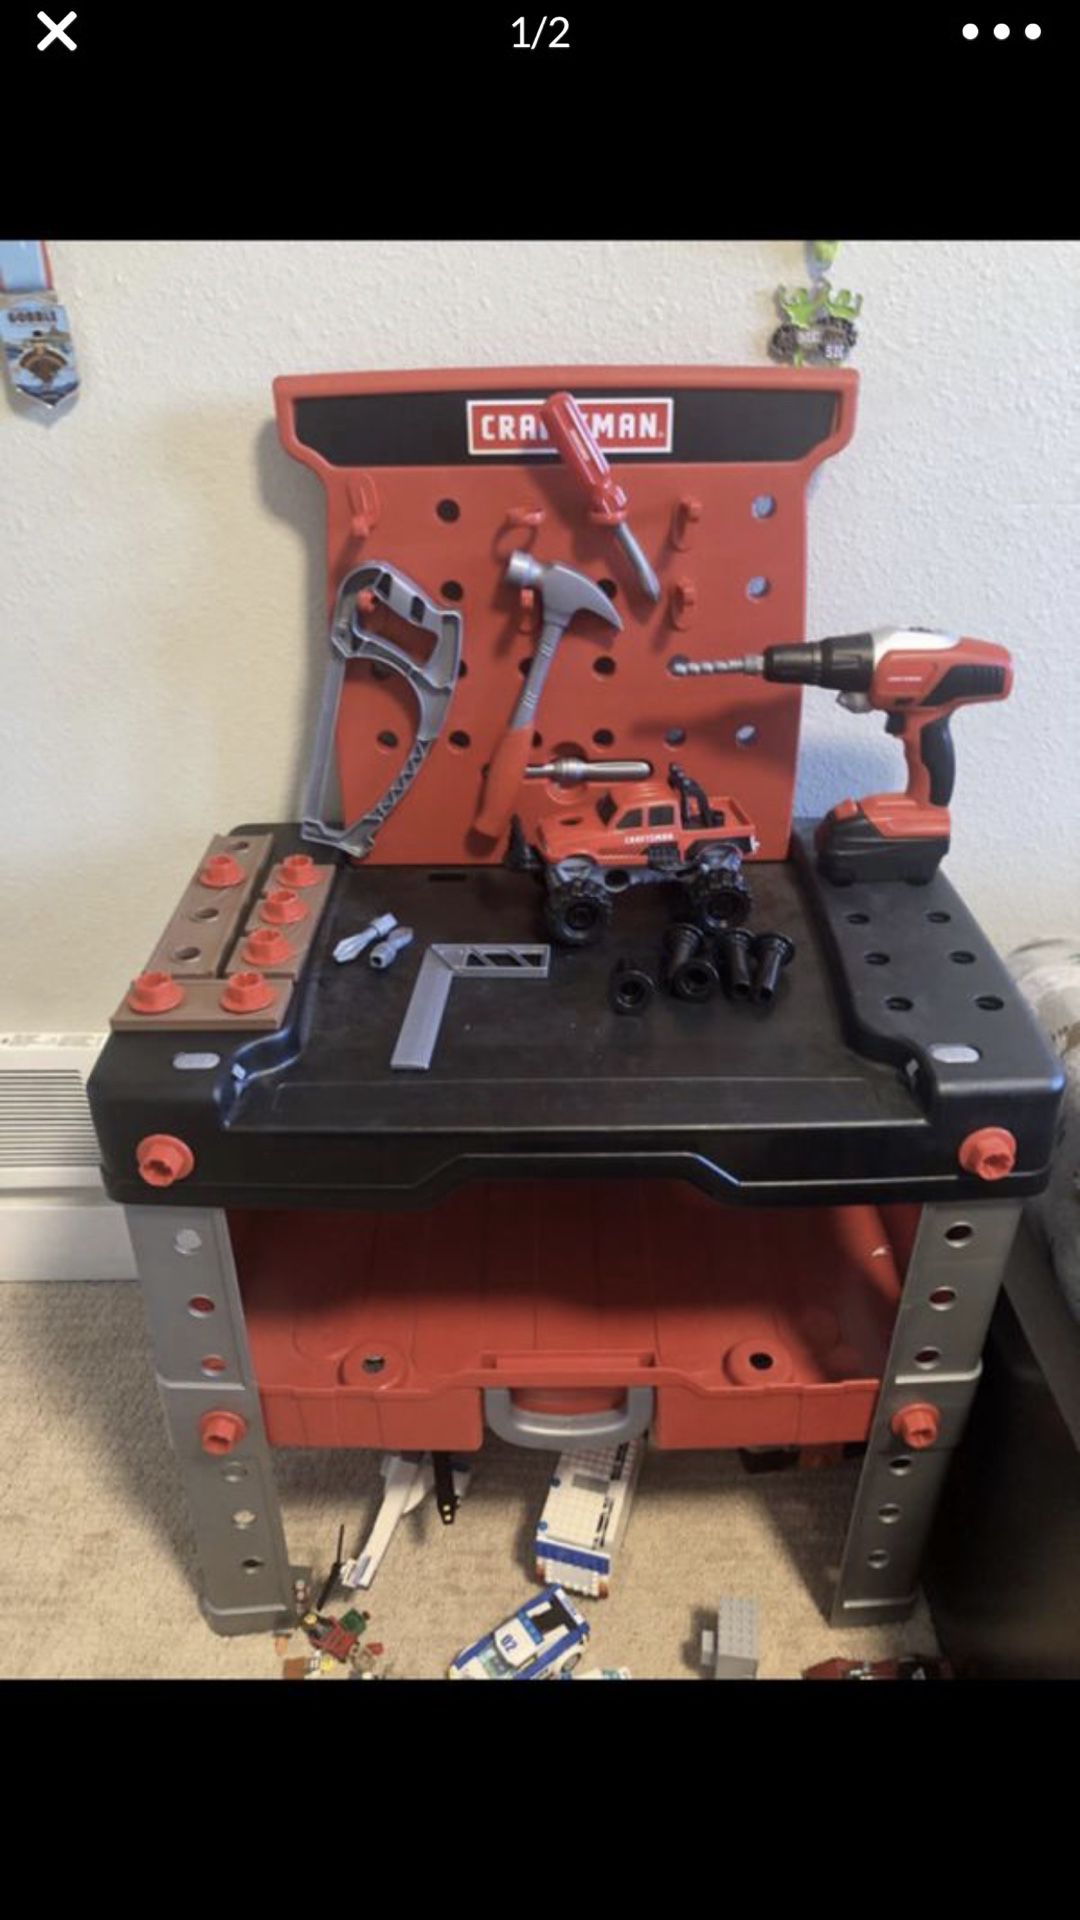 Craftsman toy work bench and tools